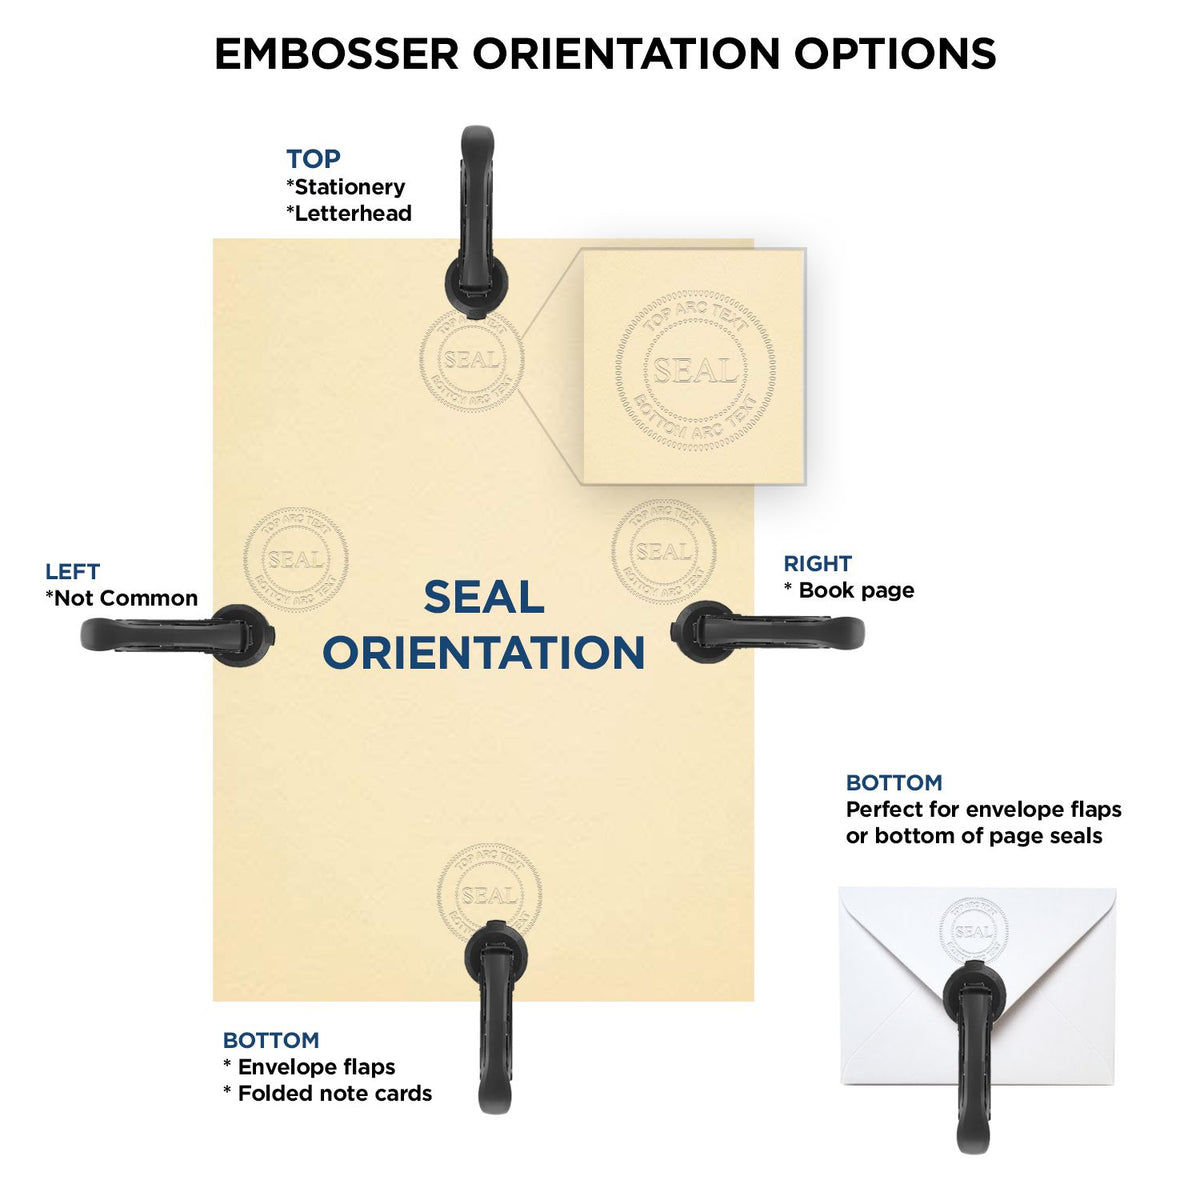 An infographic for the Handheld Vermont Professional Engineer Embosser showing embosser orientation, this is showing examples of a top, bottom, right and left insert.